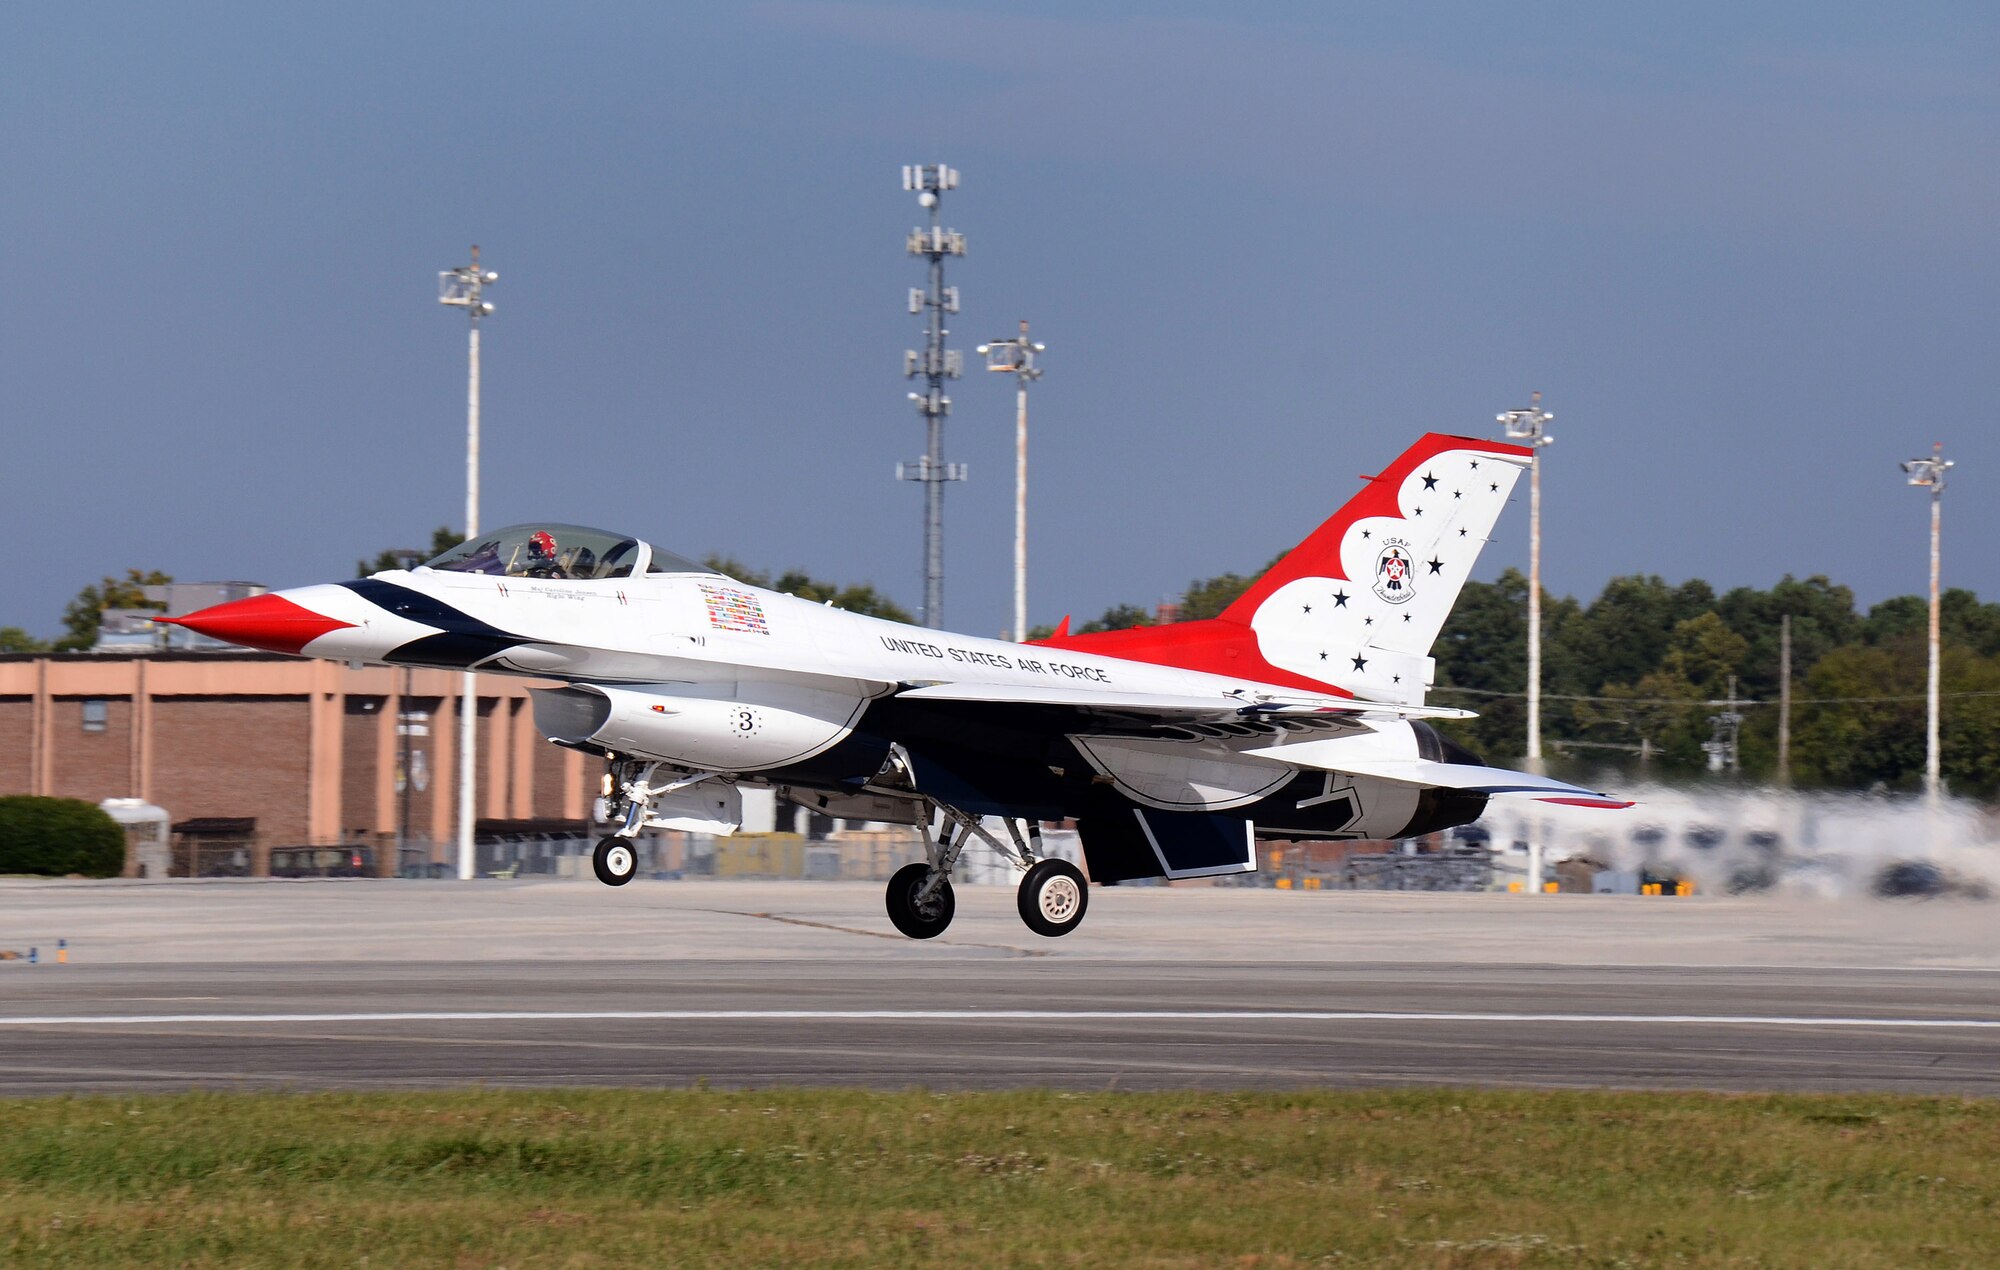 Thunderbird #3, Maj. Caroline Jensen, flying right wing in the diamond formation, departs Dobbins Air Reserve Base for the Wings Over North Georgia air show Oct. 18, 2014. The USAF Air Demonstration Squadron Thunderbirds are using Dobbins as their base of operations for their performances at the air show this weekend at the Russell Regional Airport in Rome, Georgia. (U.S. Air Force photo/ Brad Fallin/Released)